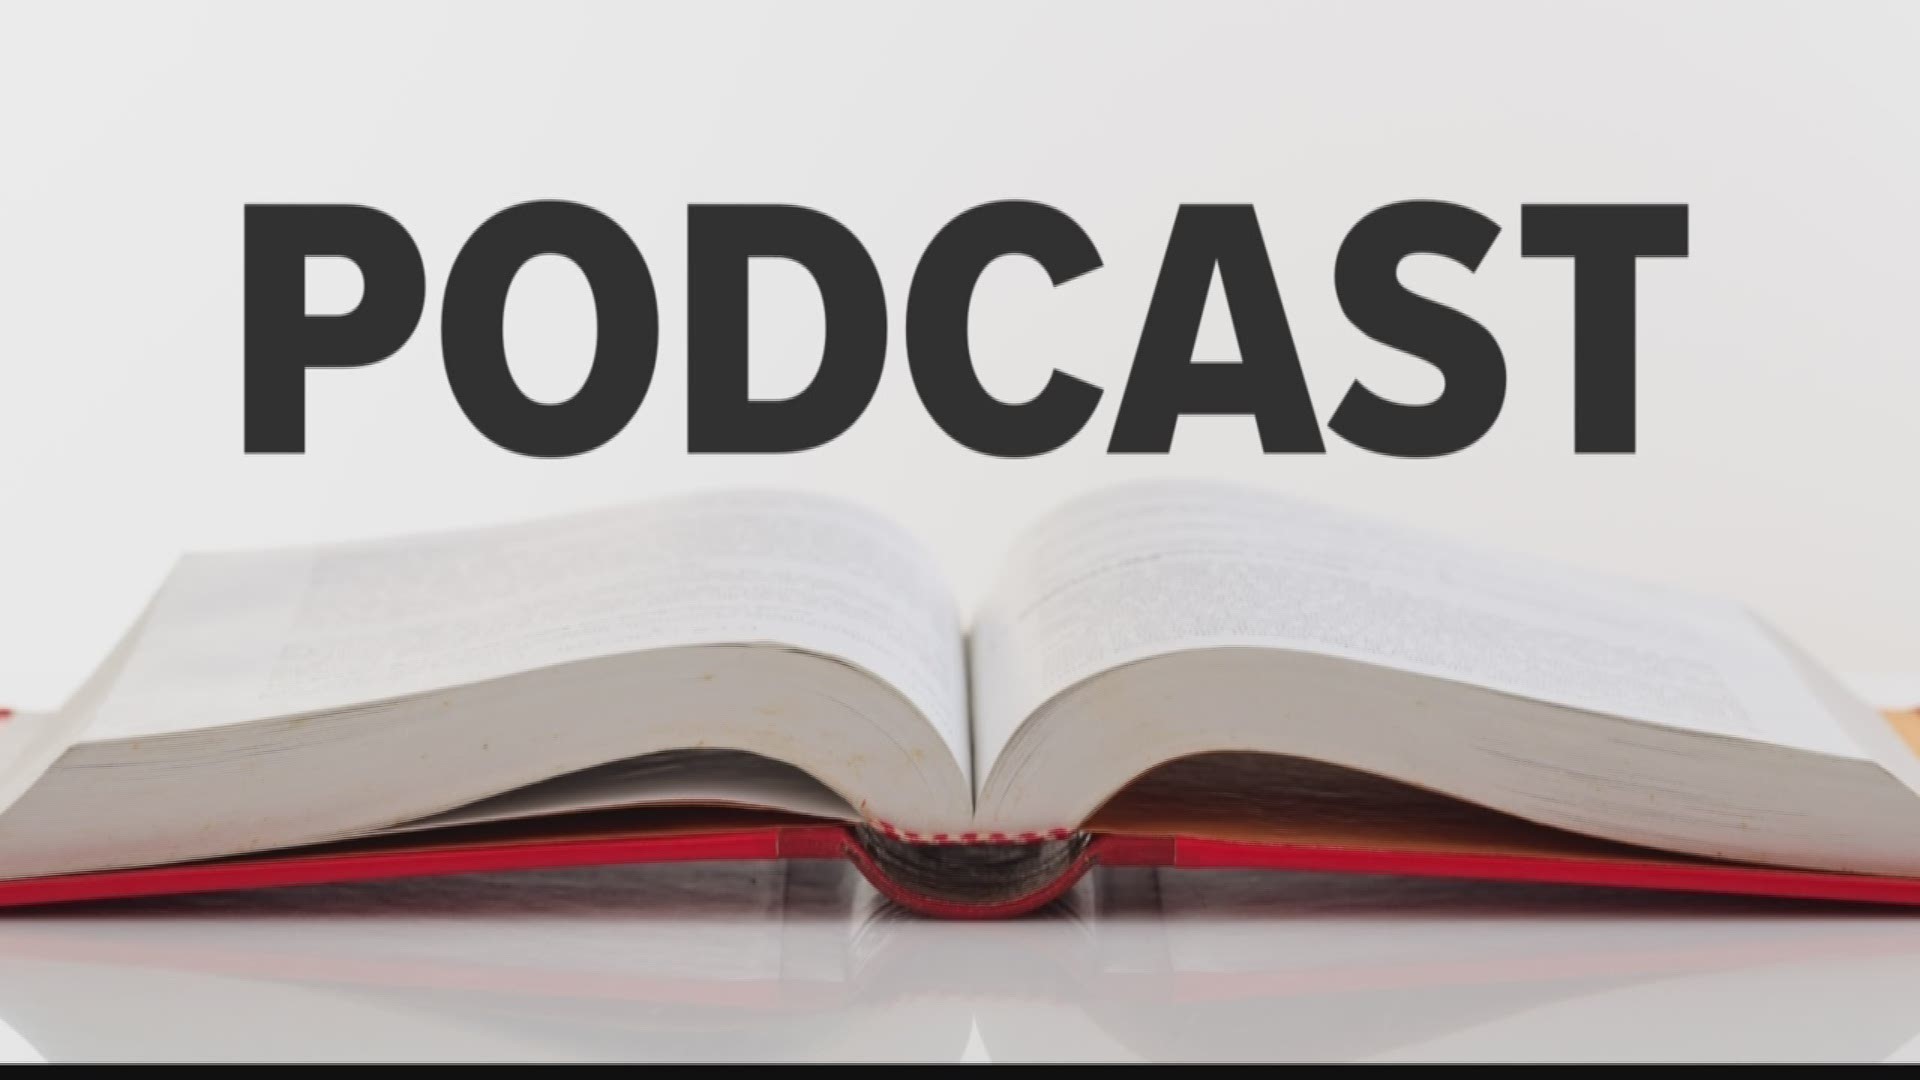 We go Beyond the Headline to learn more about Podcasts.